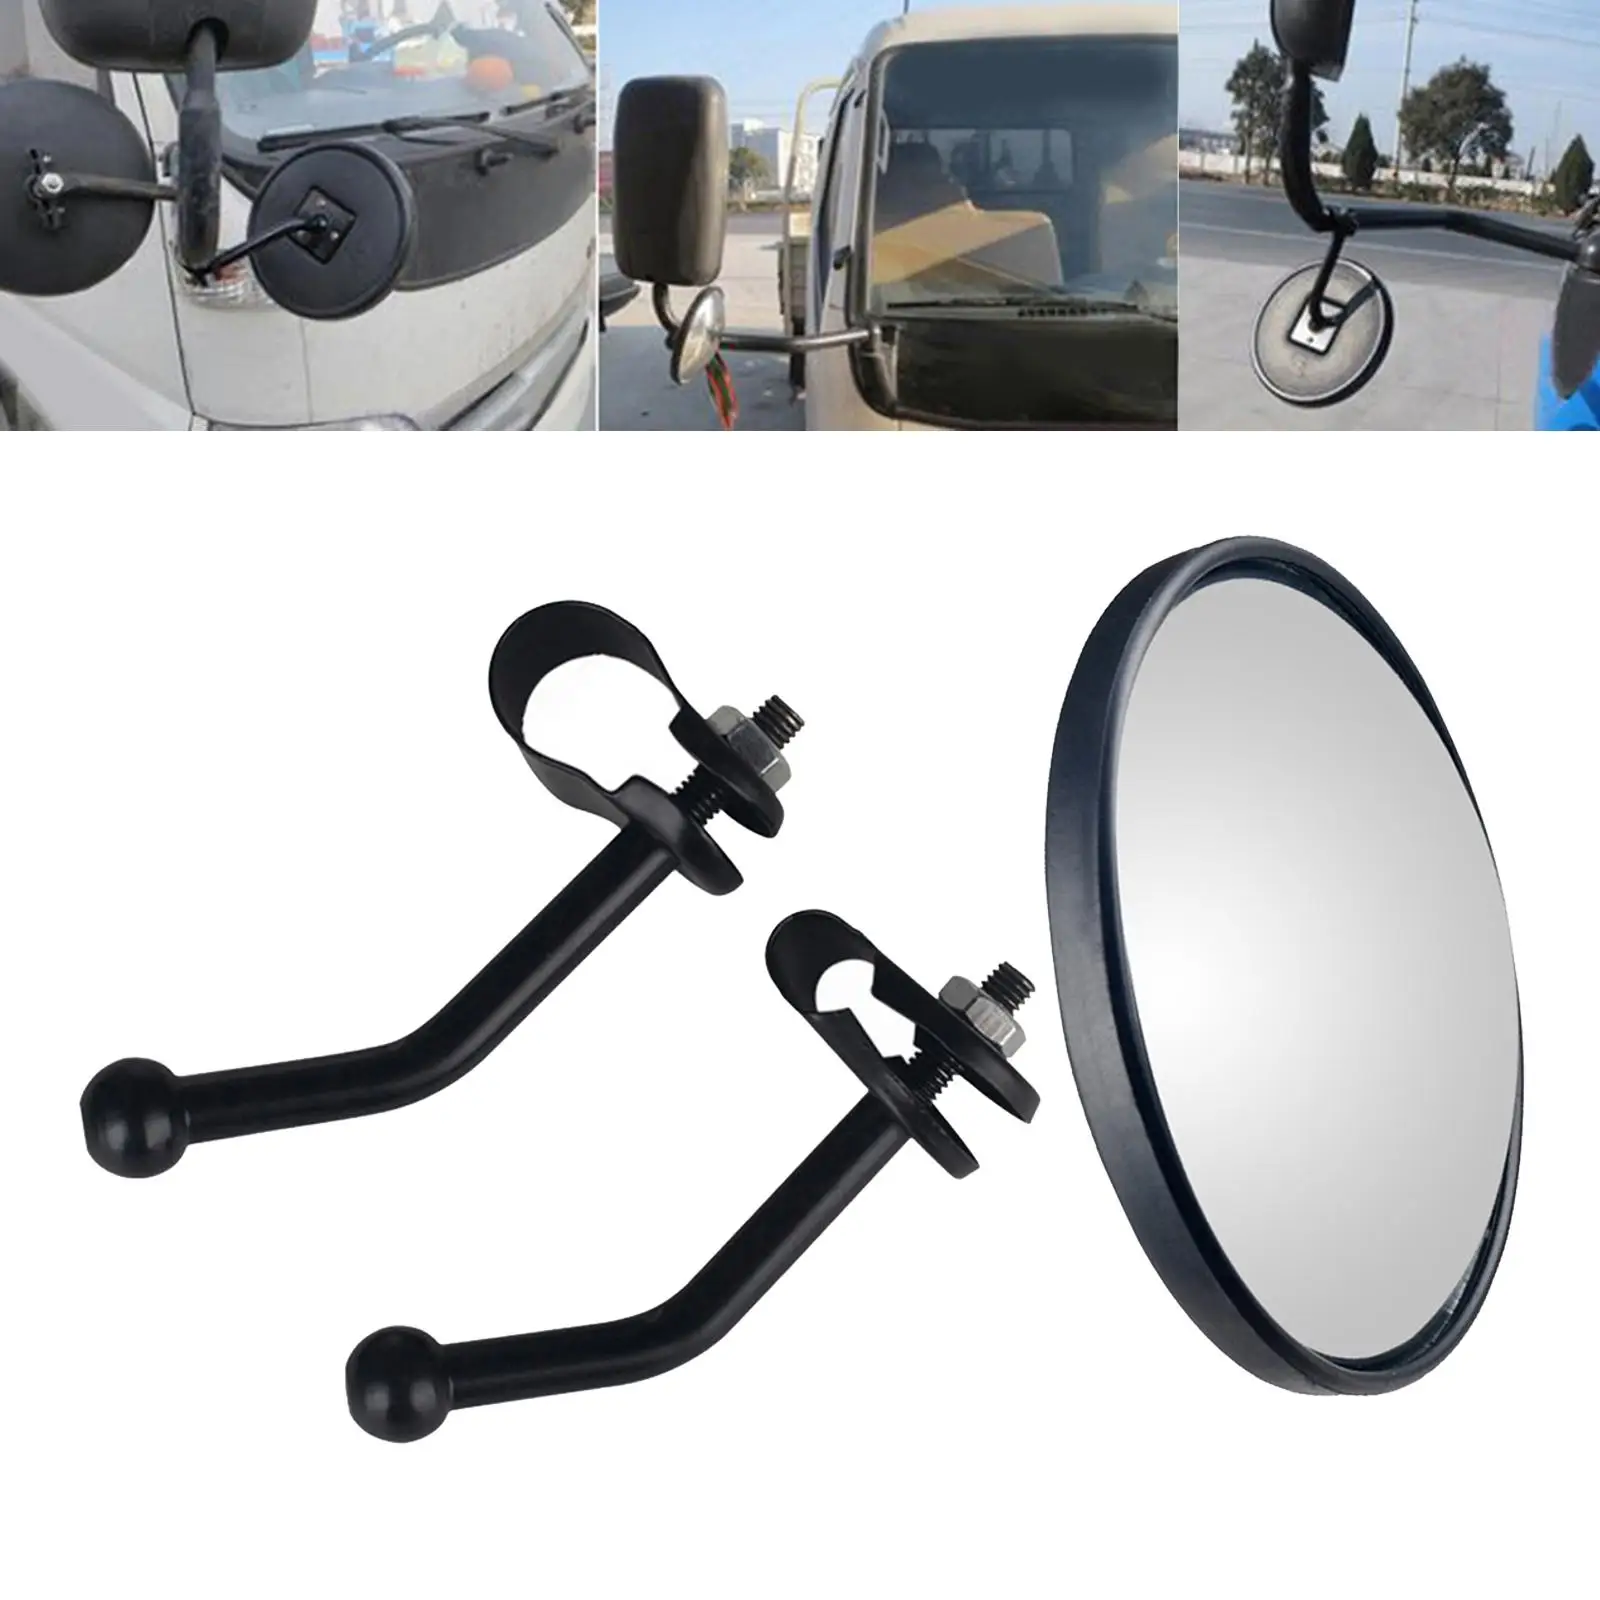 Adjustable Blind Spot Mirrors Car Auxiliary Accessories Replace Large View Field Round Side Convex Mirror Fit for Truck